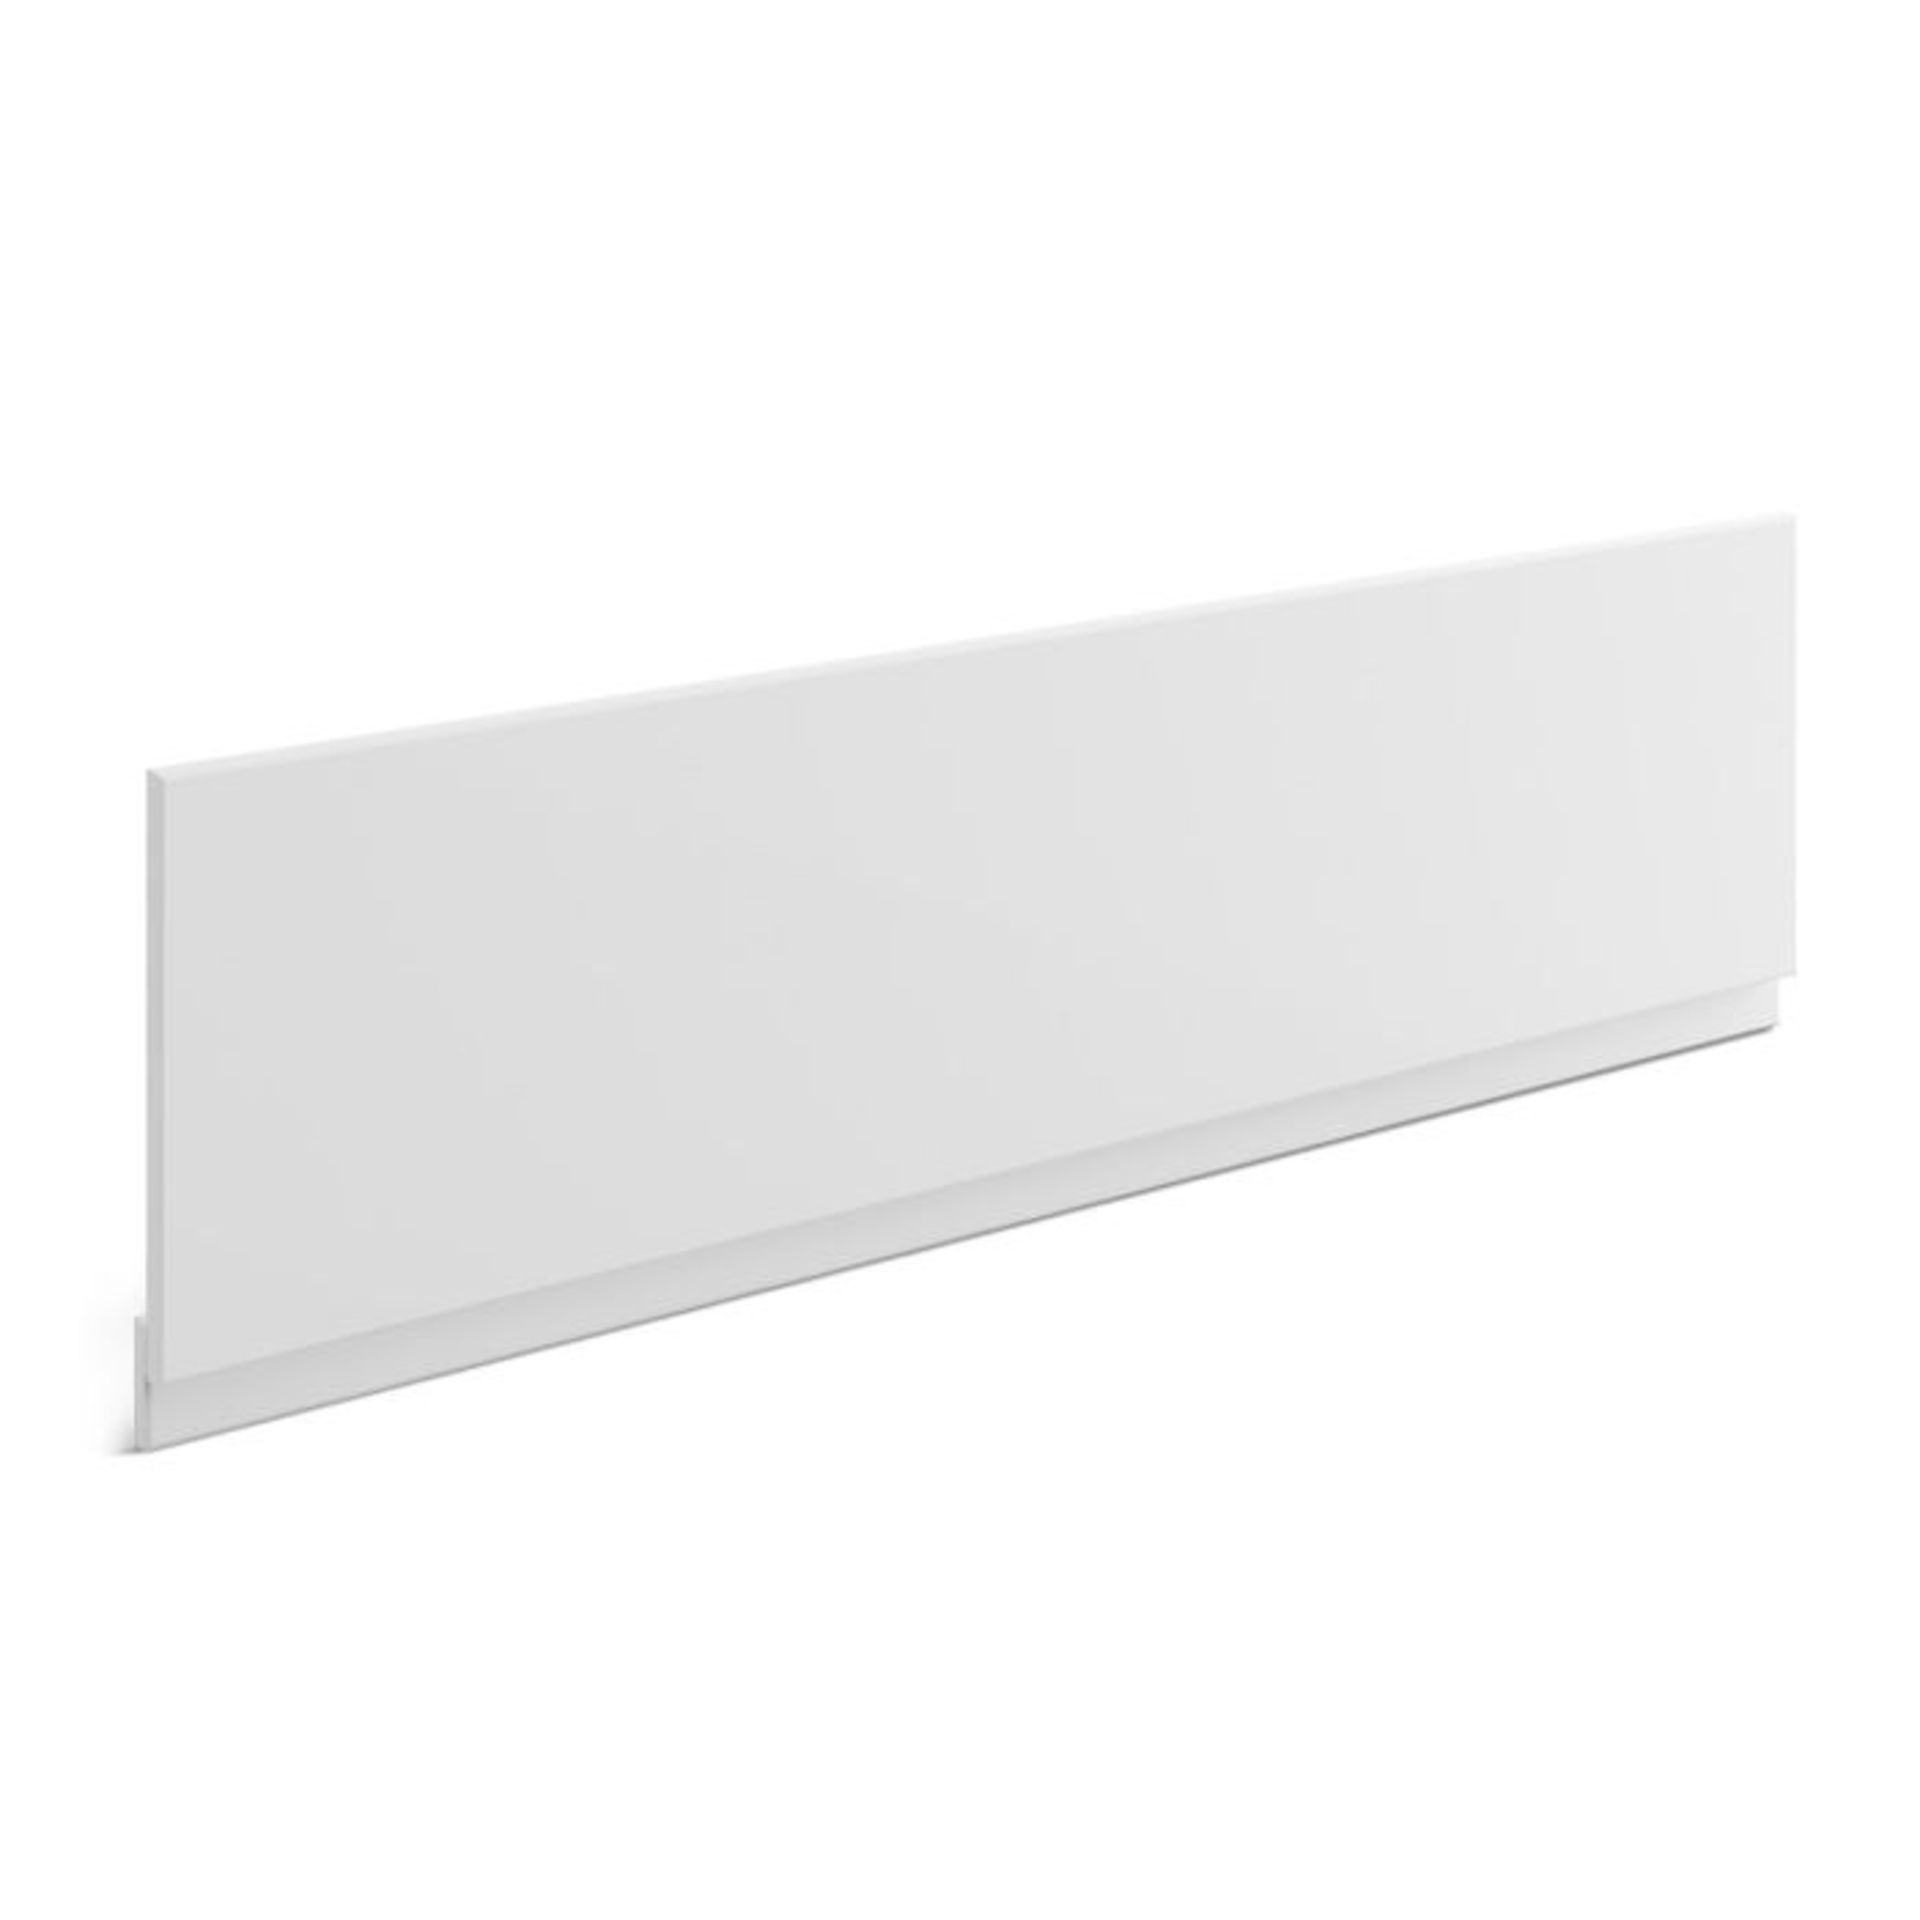 (W45) 1800mm MDF Bath Front Panel - Gloss White. 18mm thick durable MDF board Adjustable Height :